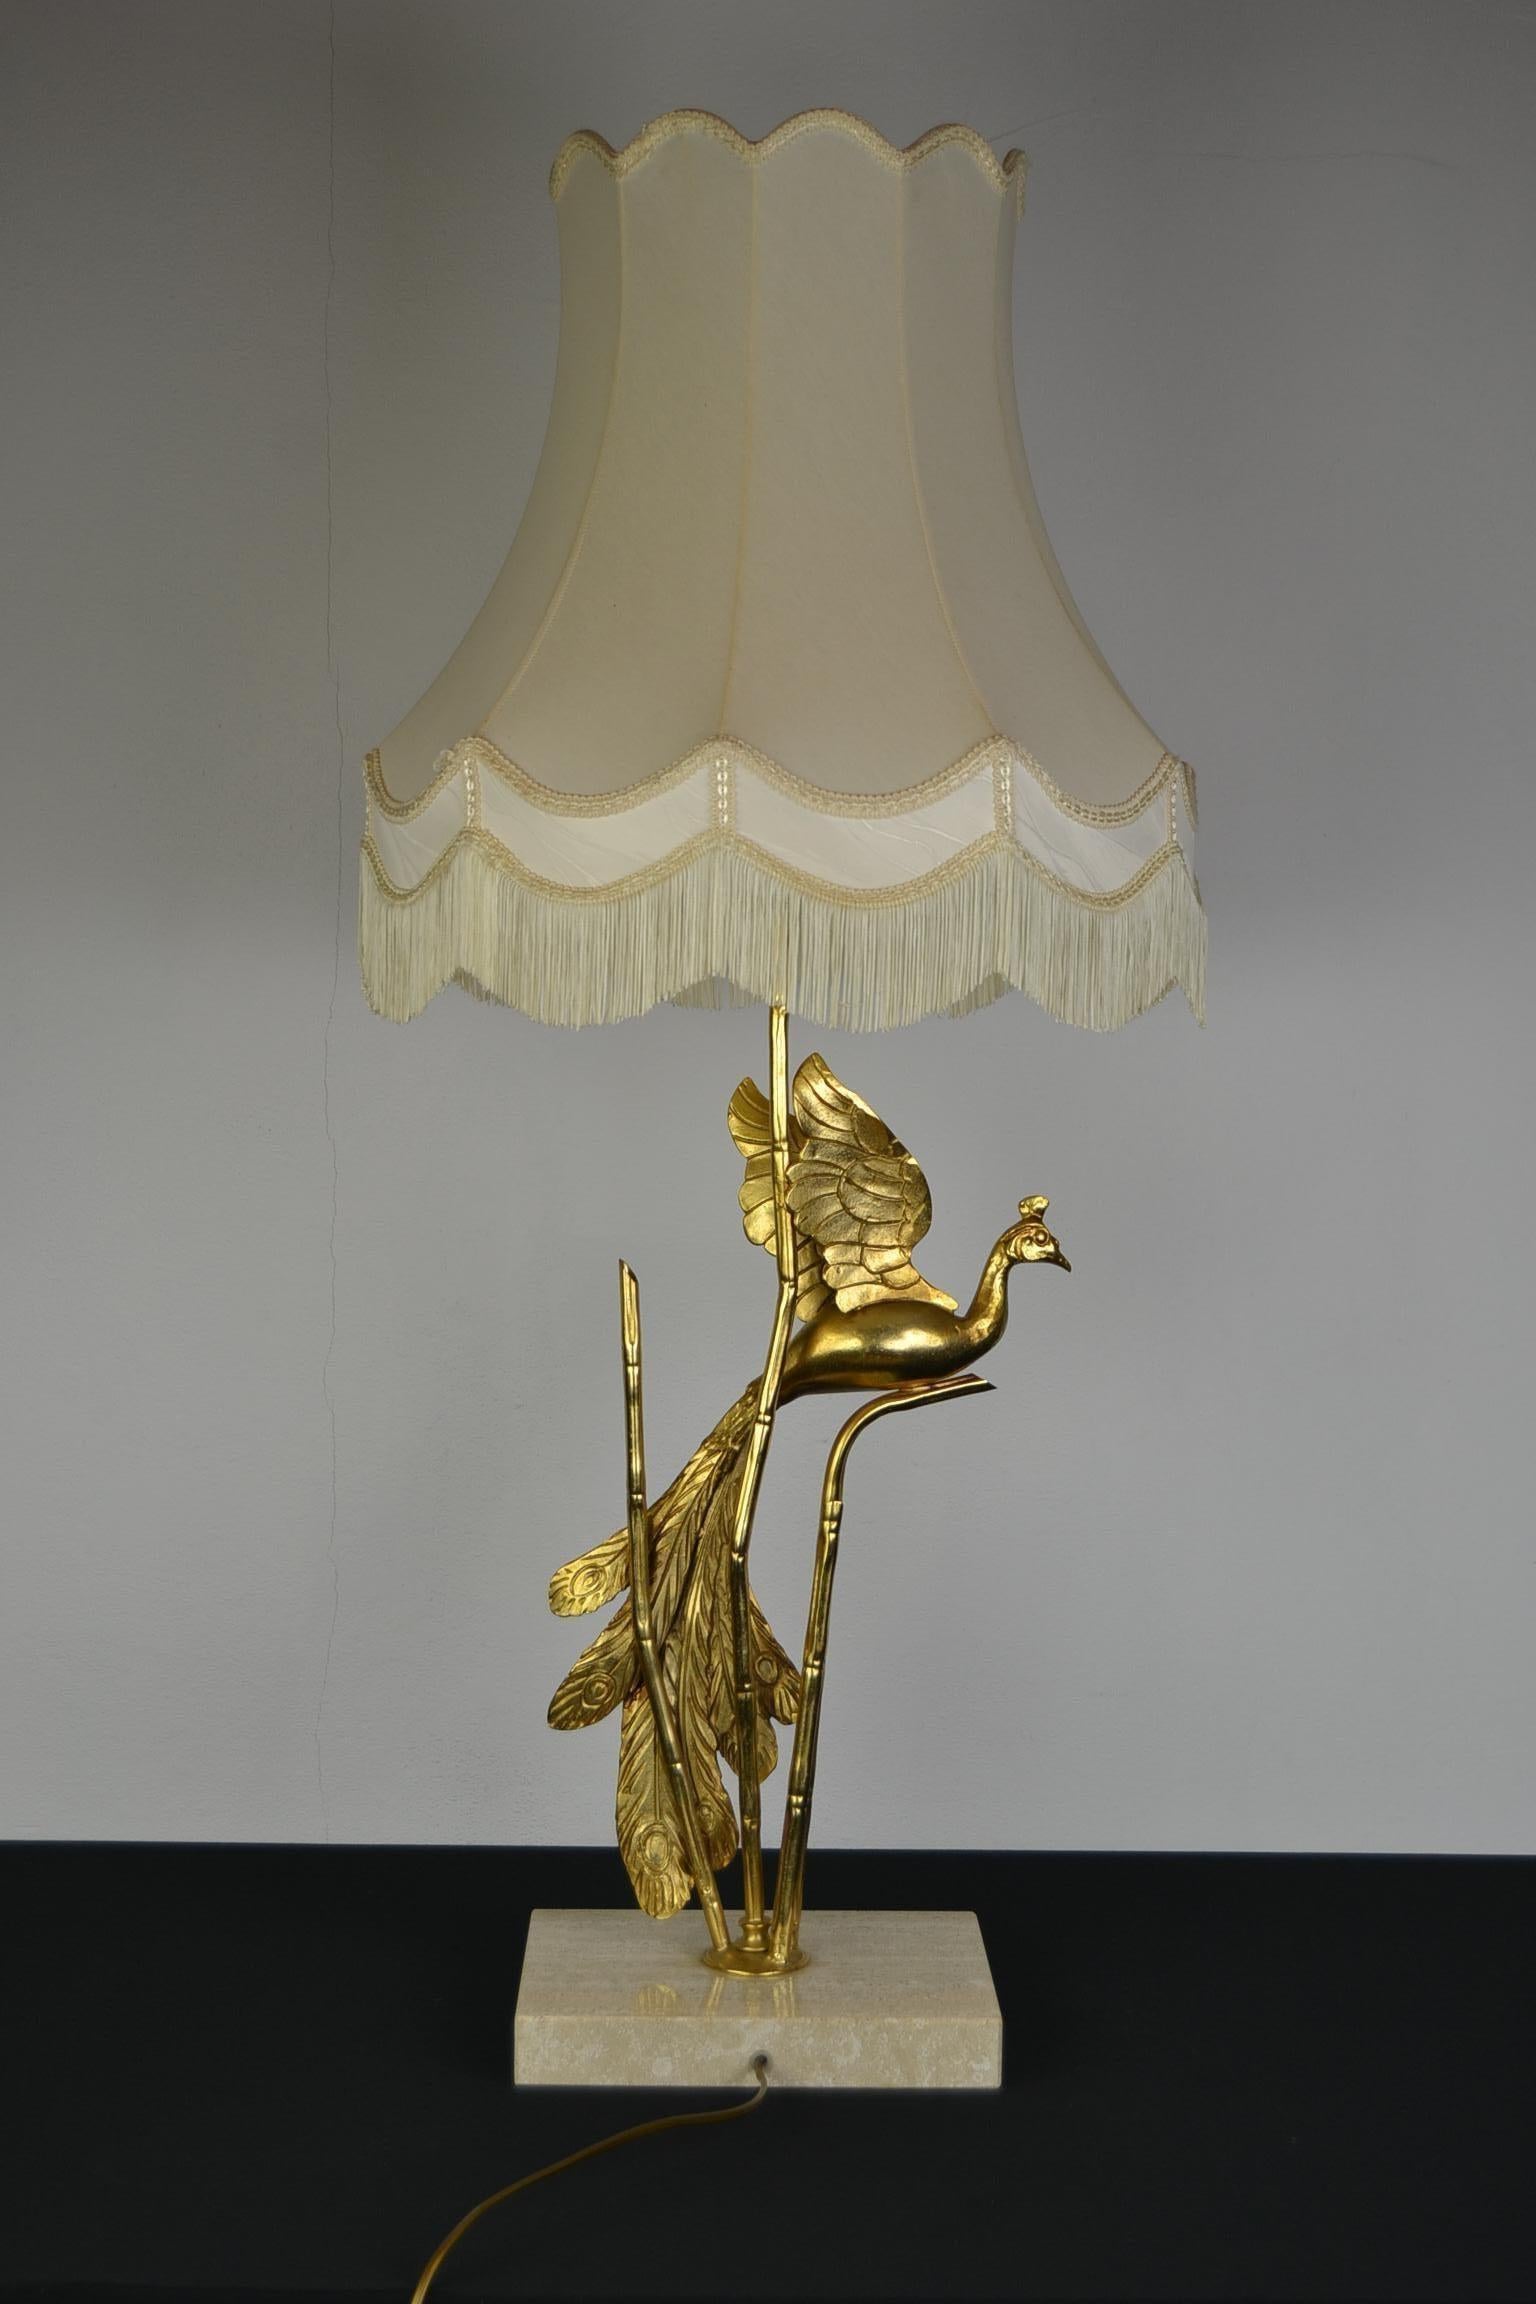 Large Lanciotto Galeotti Peacock Table Lamp for L'Originale, Italy, 1970s For Sale 4